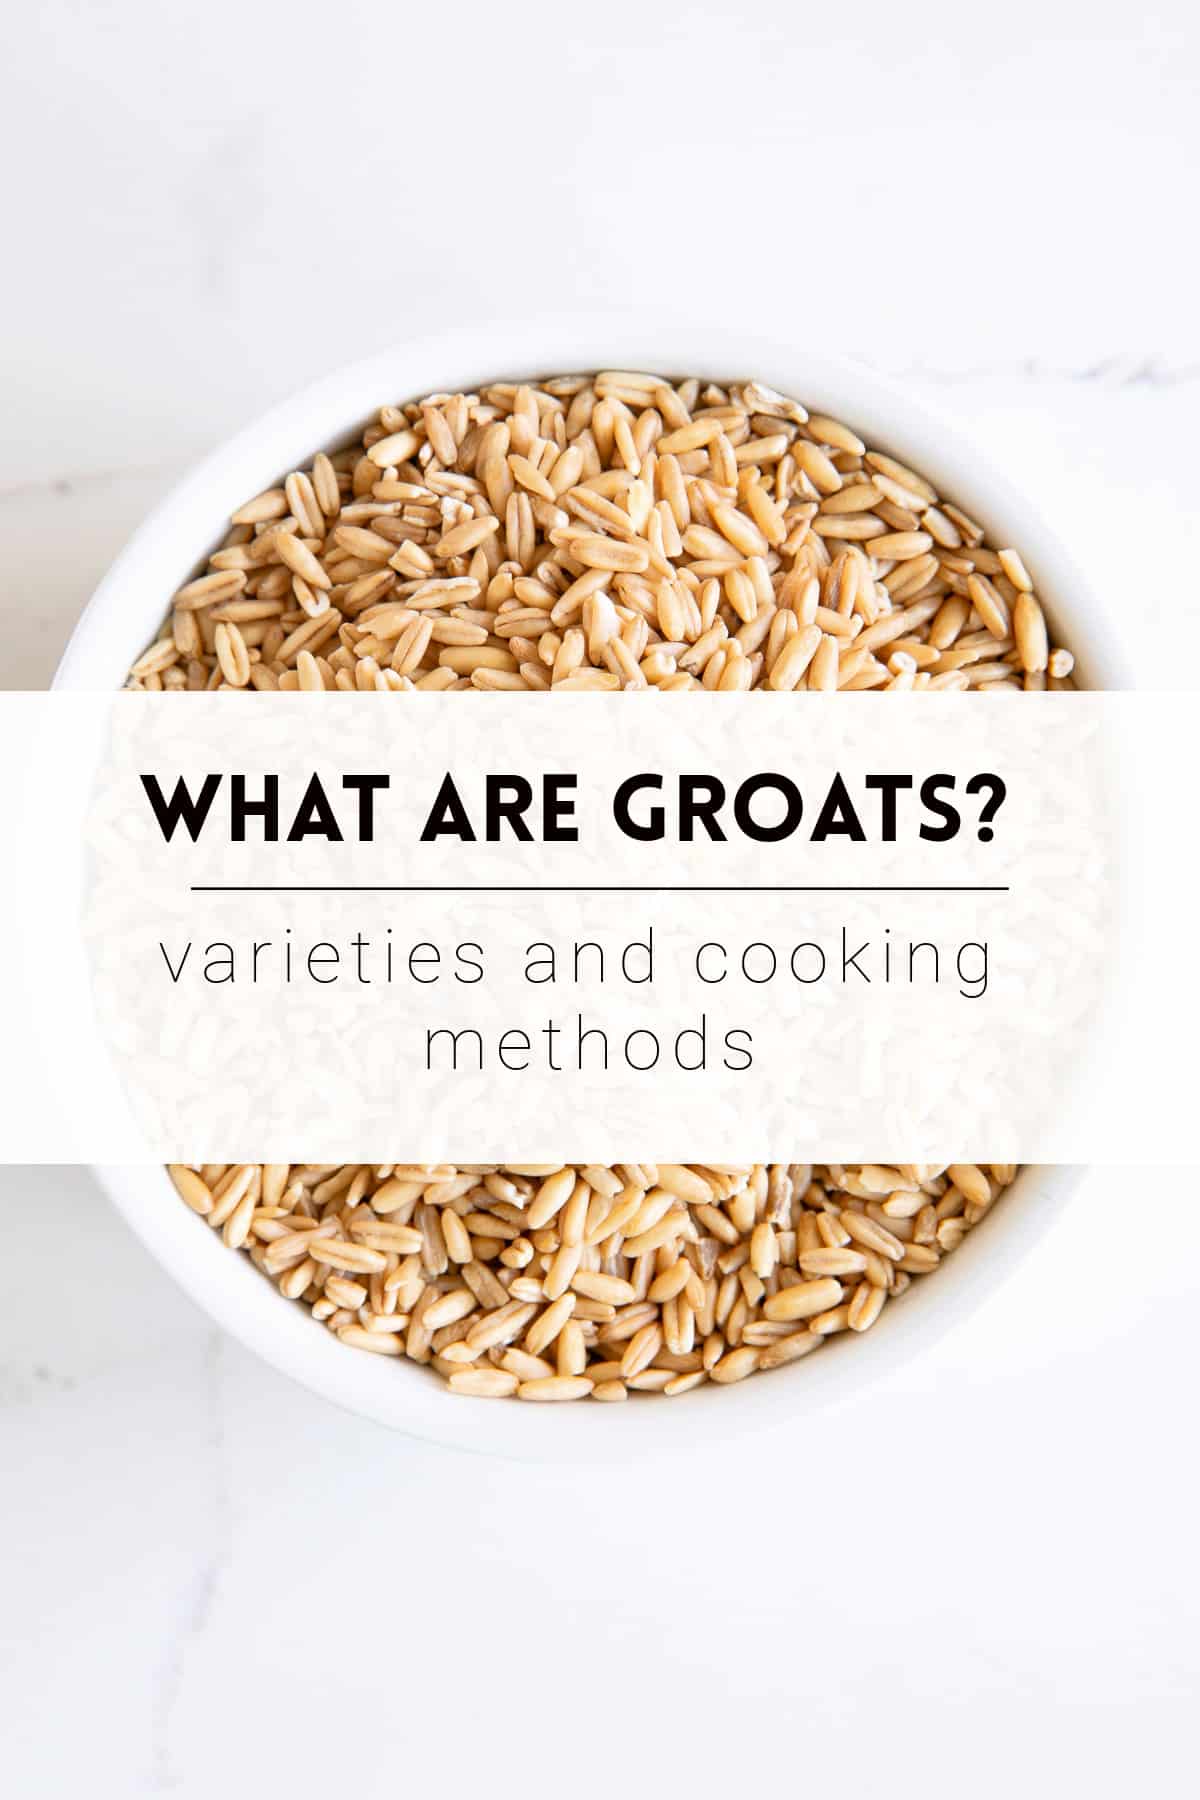 Image of a small white ramekin filled with oat groats with the text overlay "What are Groats? Varieties and Cooking Methods".